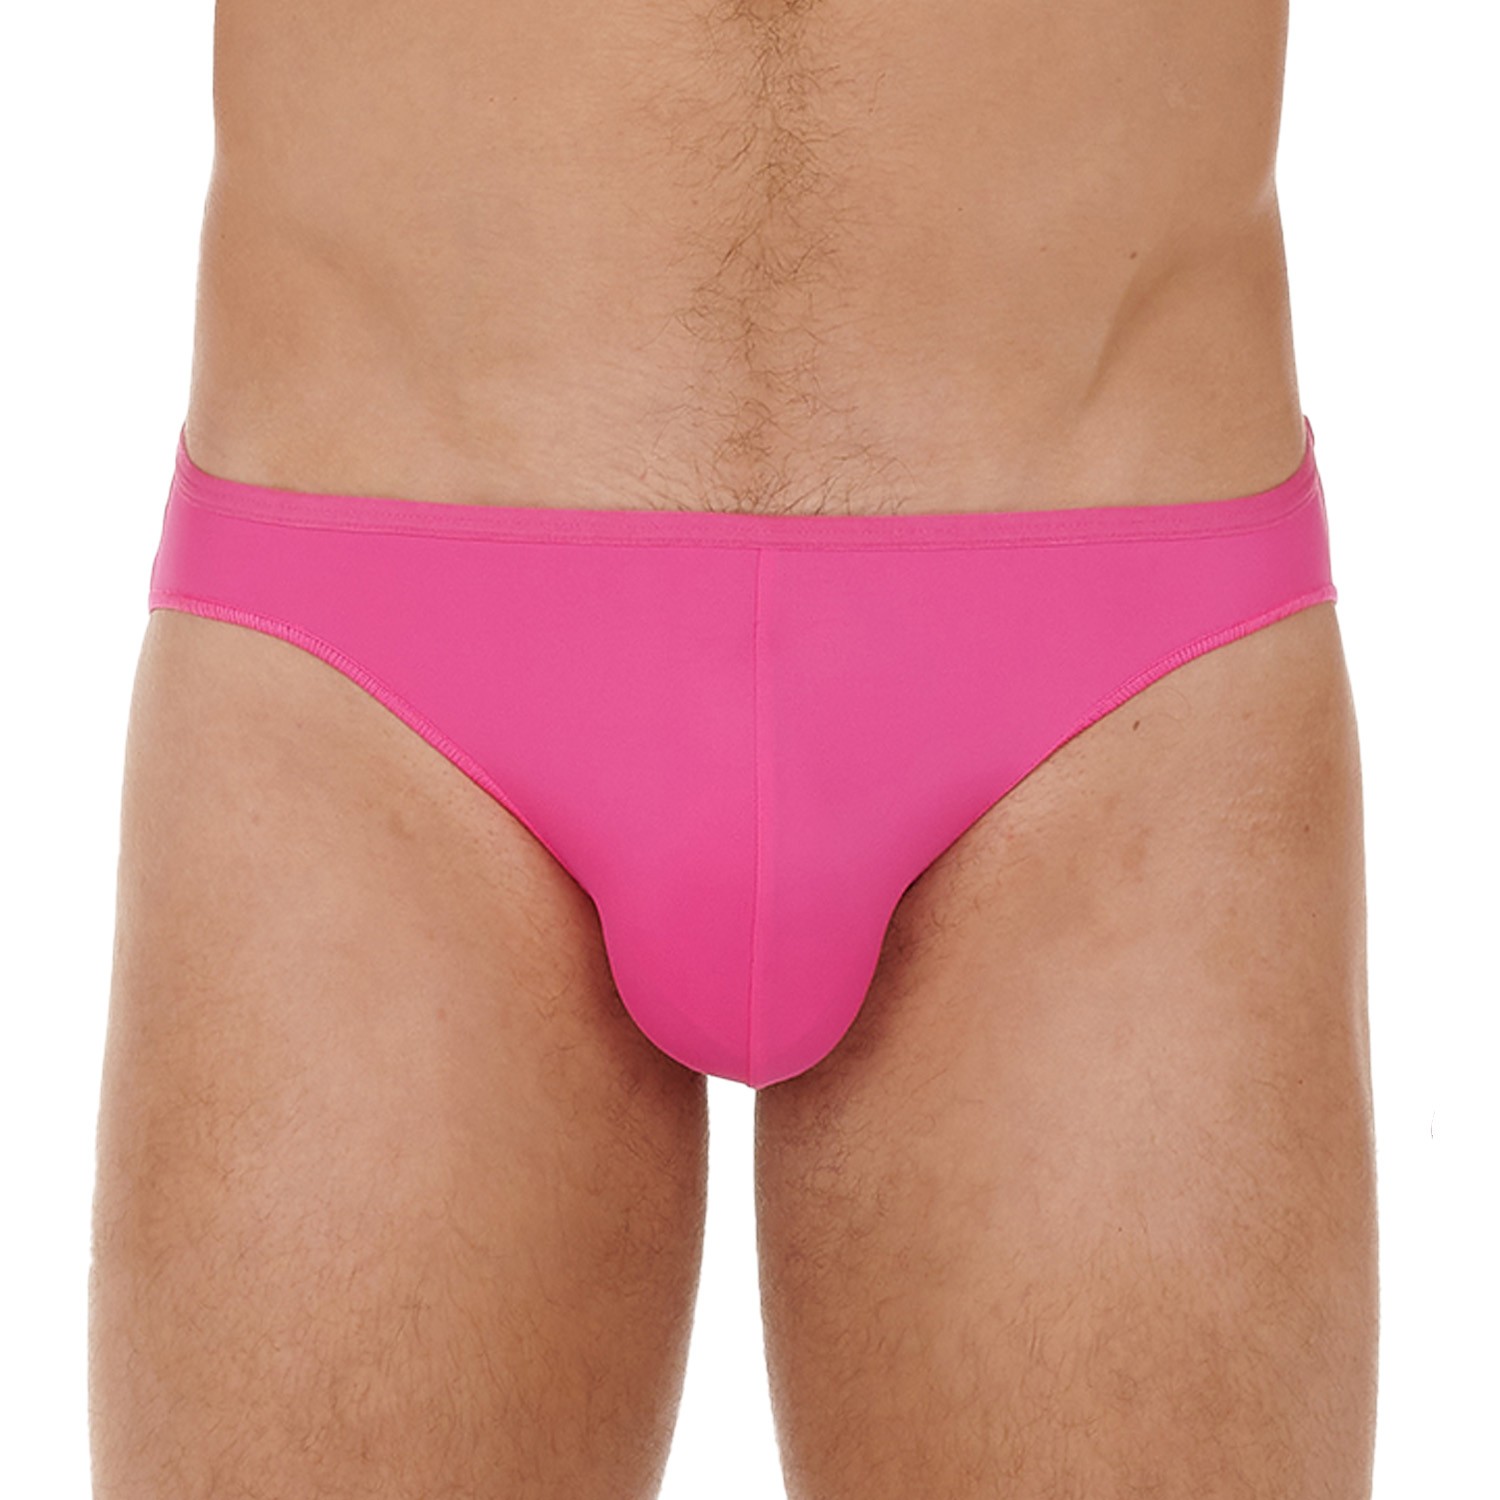 Slip micro Feathers - pink: Briefs for man brand HOM for sale onlin